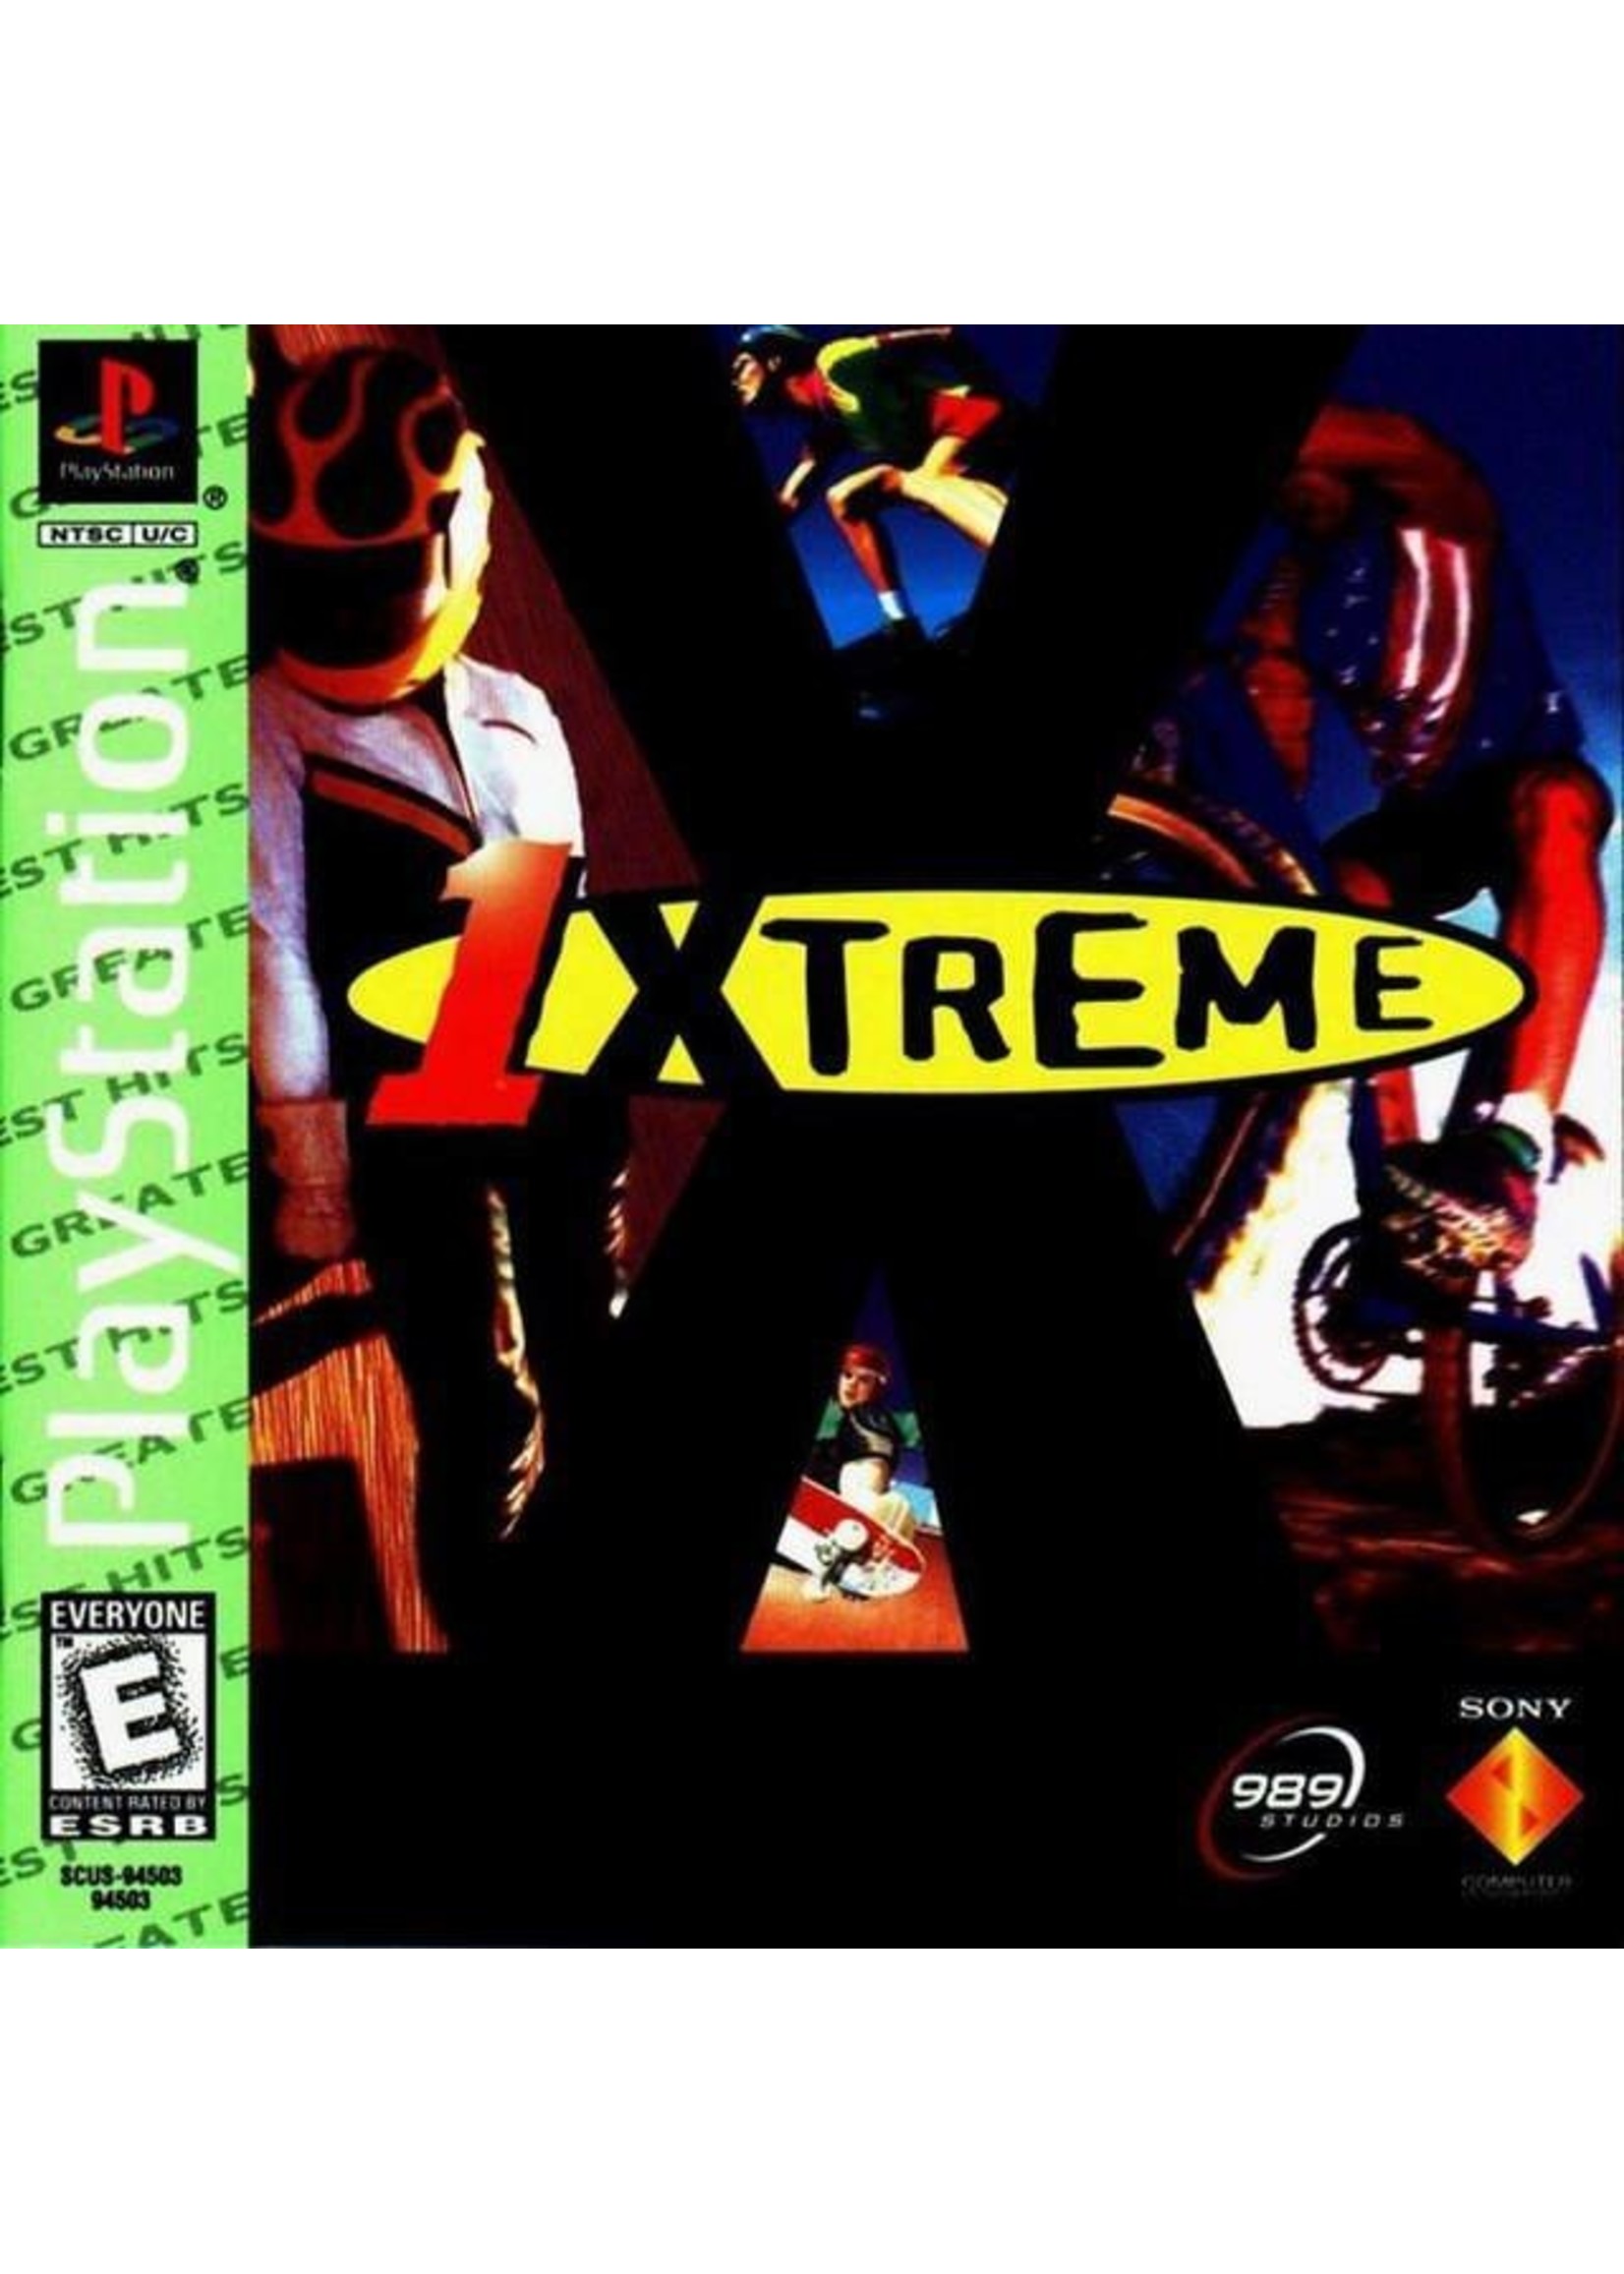 Sony Playstation 1 (PS1) 1Xtreme